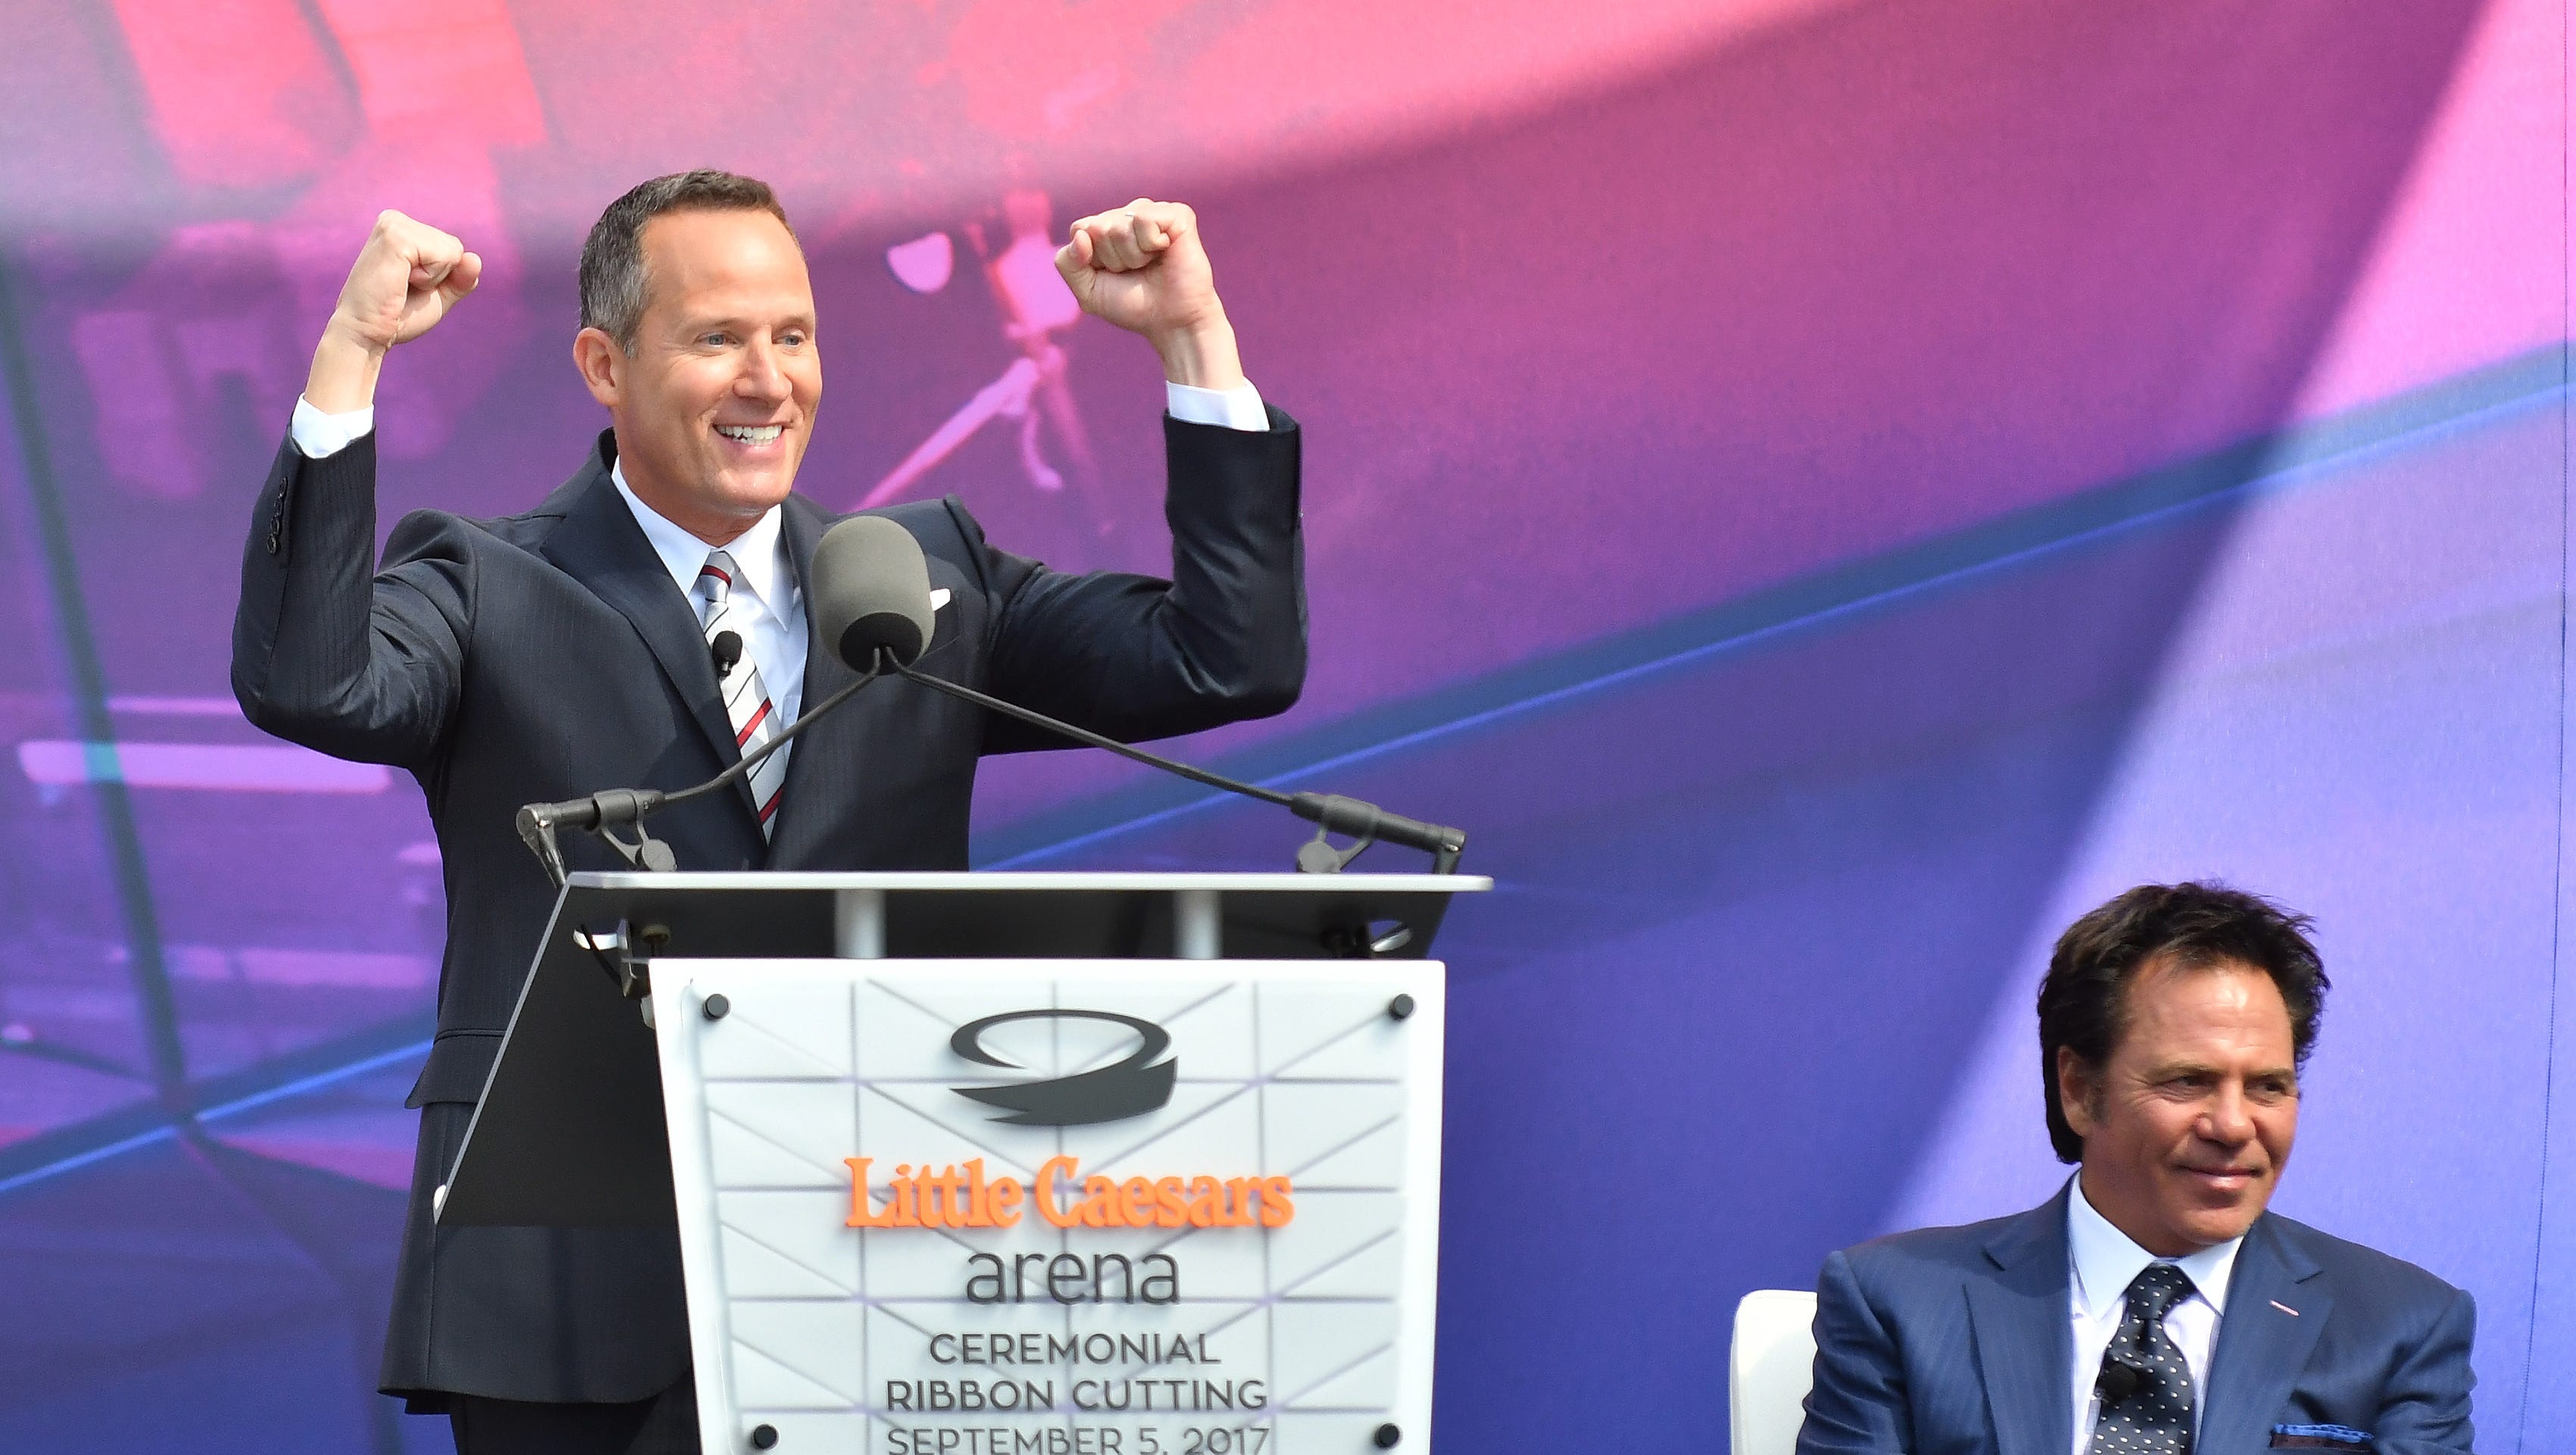 Chris Ilitch immitates his father, Mike Ilitch, pumping two fists in the air during the ribbon cutting ceremony for Little Caesars Arena in Detroit on September 5, 2017.